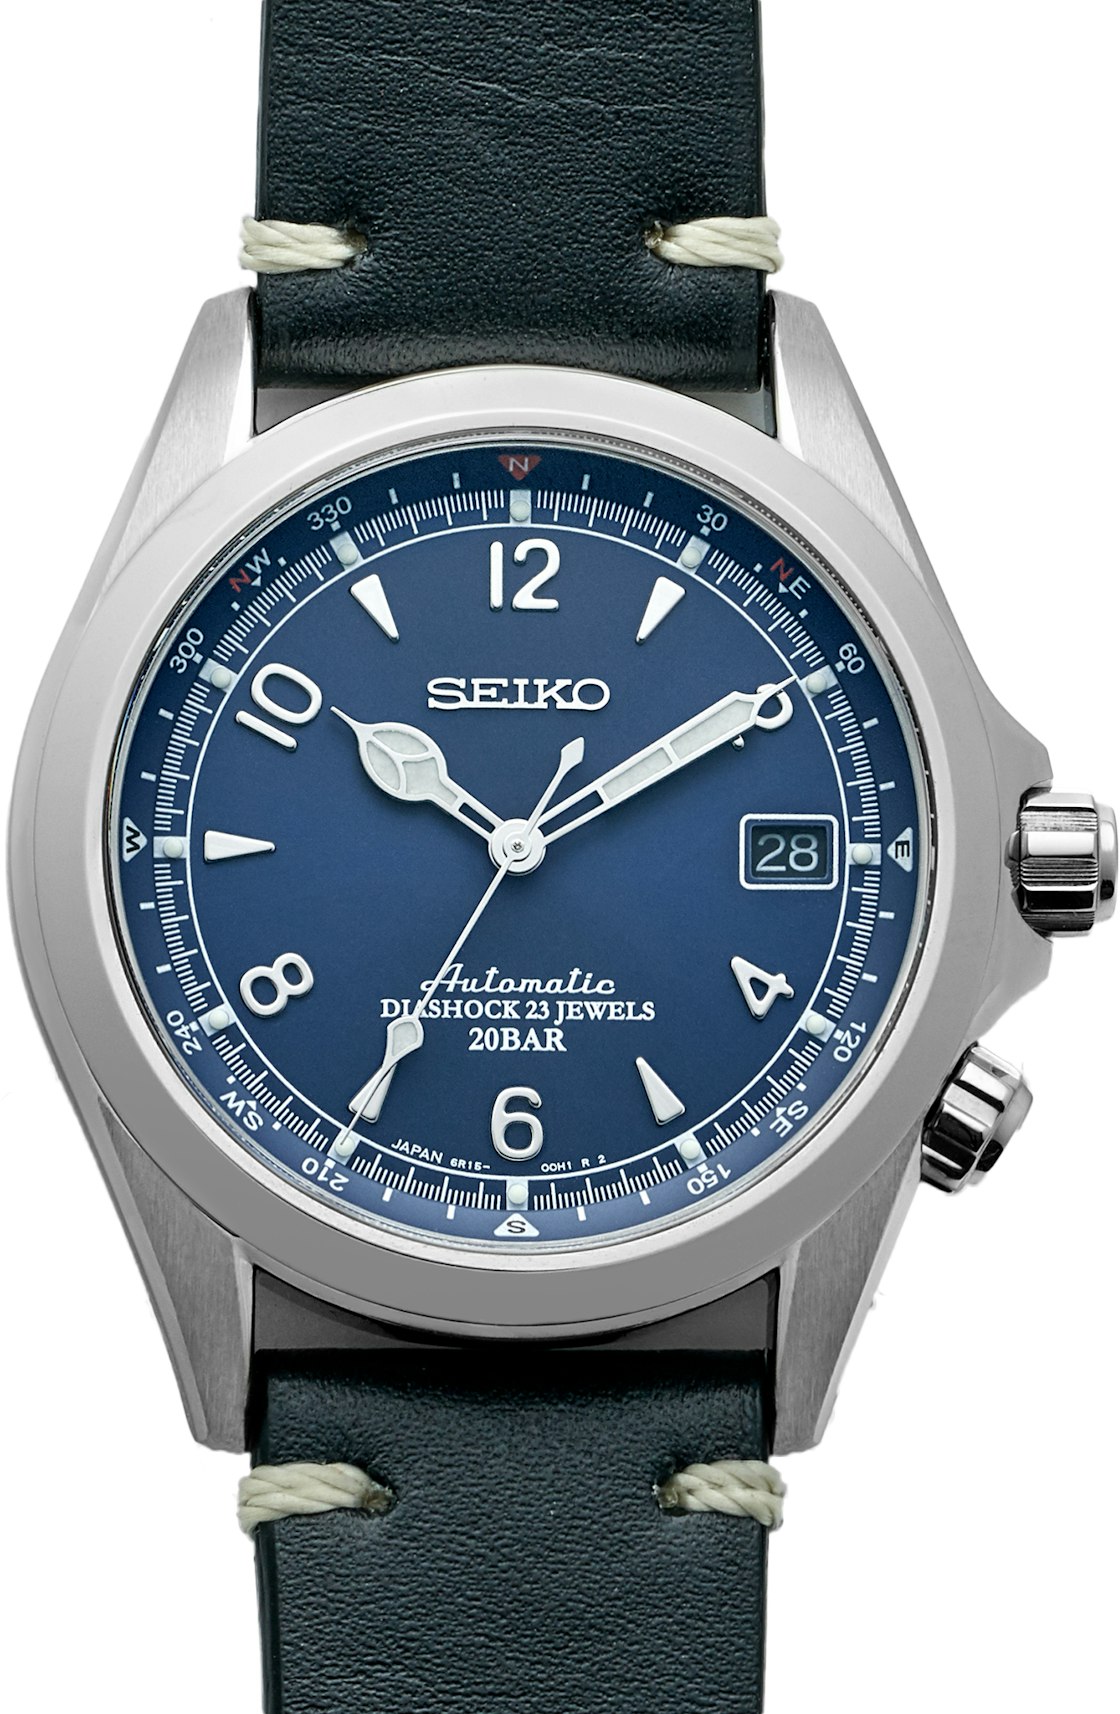 Seiko Alpinist US SPB089 - 39.5mm in Stainless Steel - US